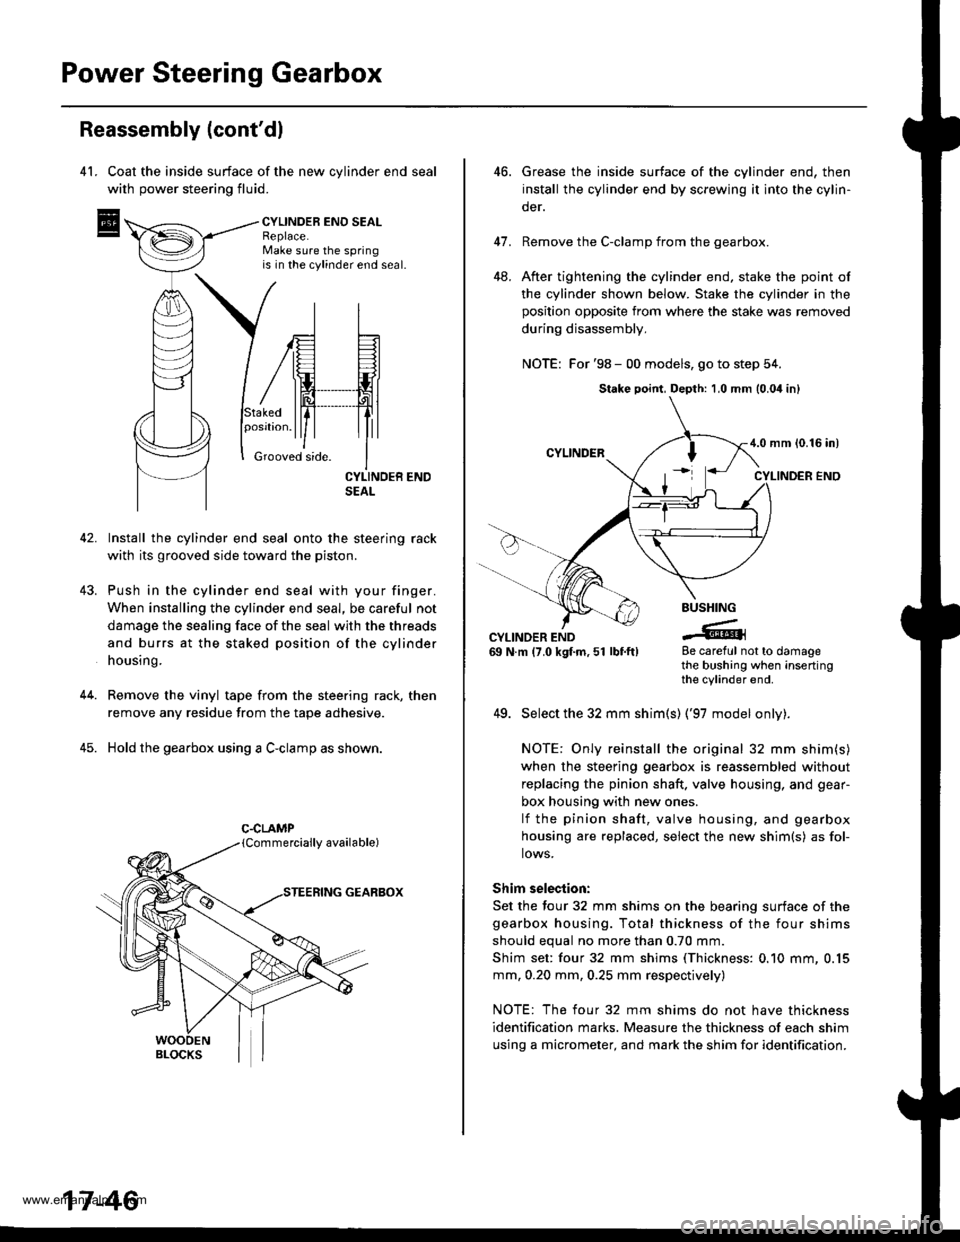 HONDA CR-V 1998 RD1-RD3 / 1.G Workshop Manual 
Power Steering Gearbox
Reassembly (contdl
4l. Coat the inside surface of the new cvlinder end seal
with power steering fluid.
CYLINDEB ENO SEALReplace.Make sure the springis in the cylinder end seal